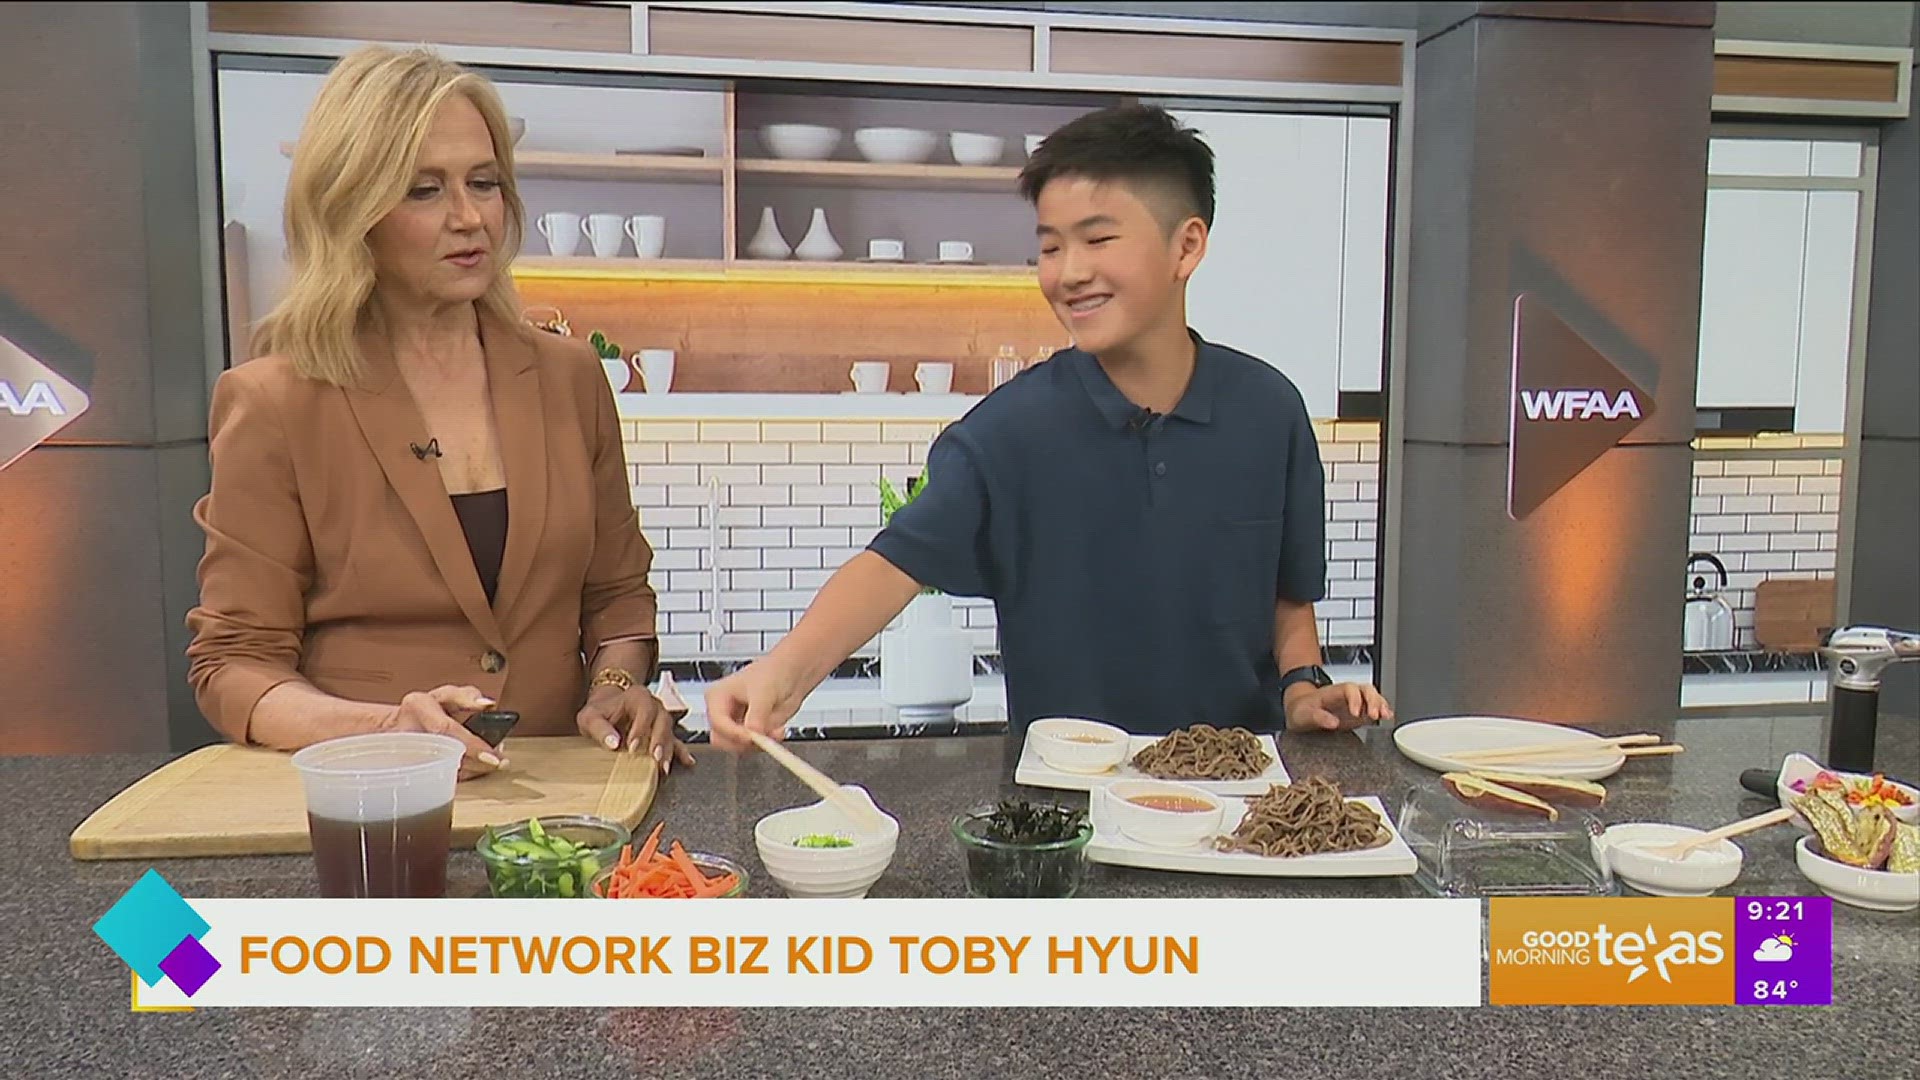 Season 11 Kid's Baking Championship competitor Toby Hyun shows us how to make tasty treats inspired by his Japan trip. Go to redbuncooking.com for more information.